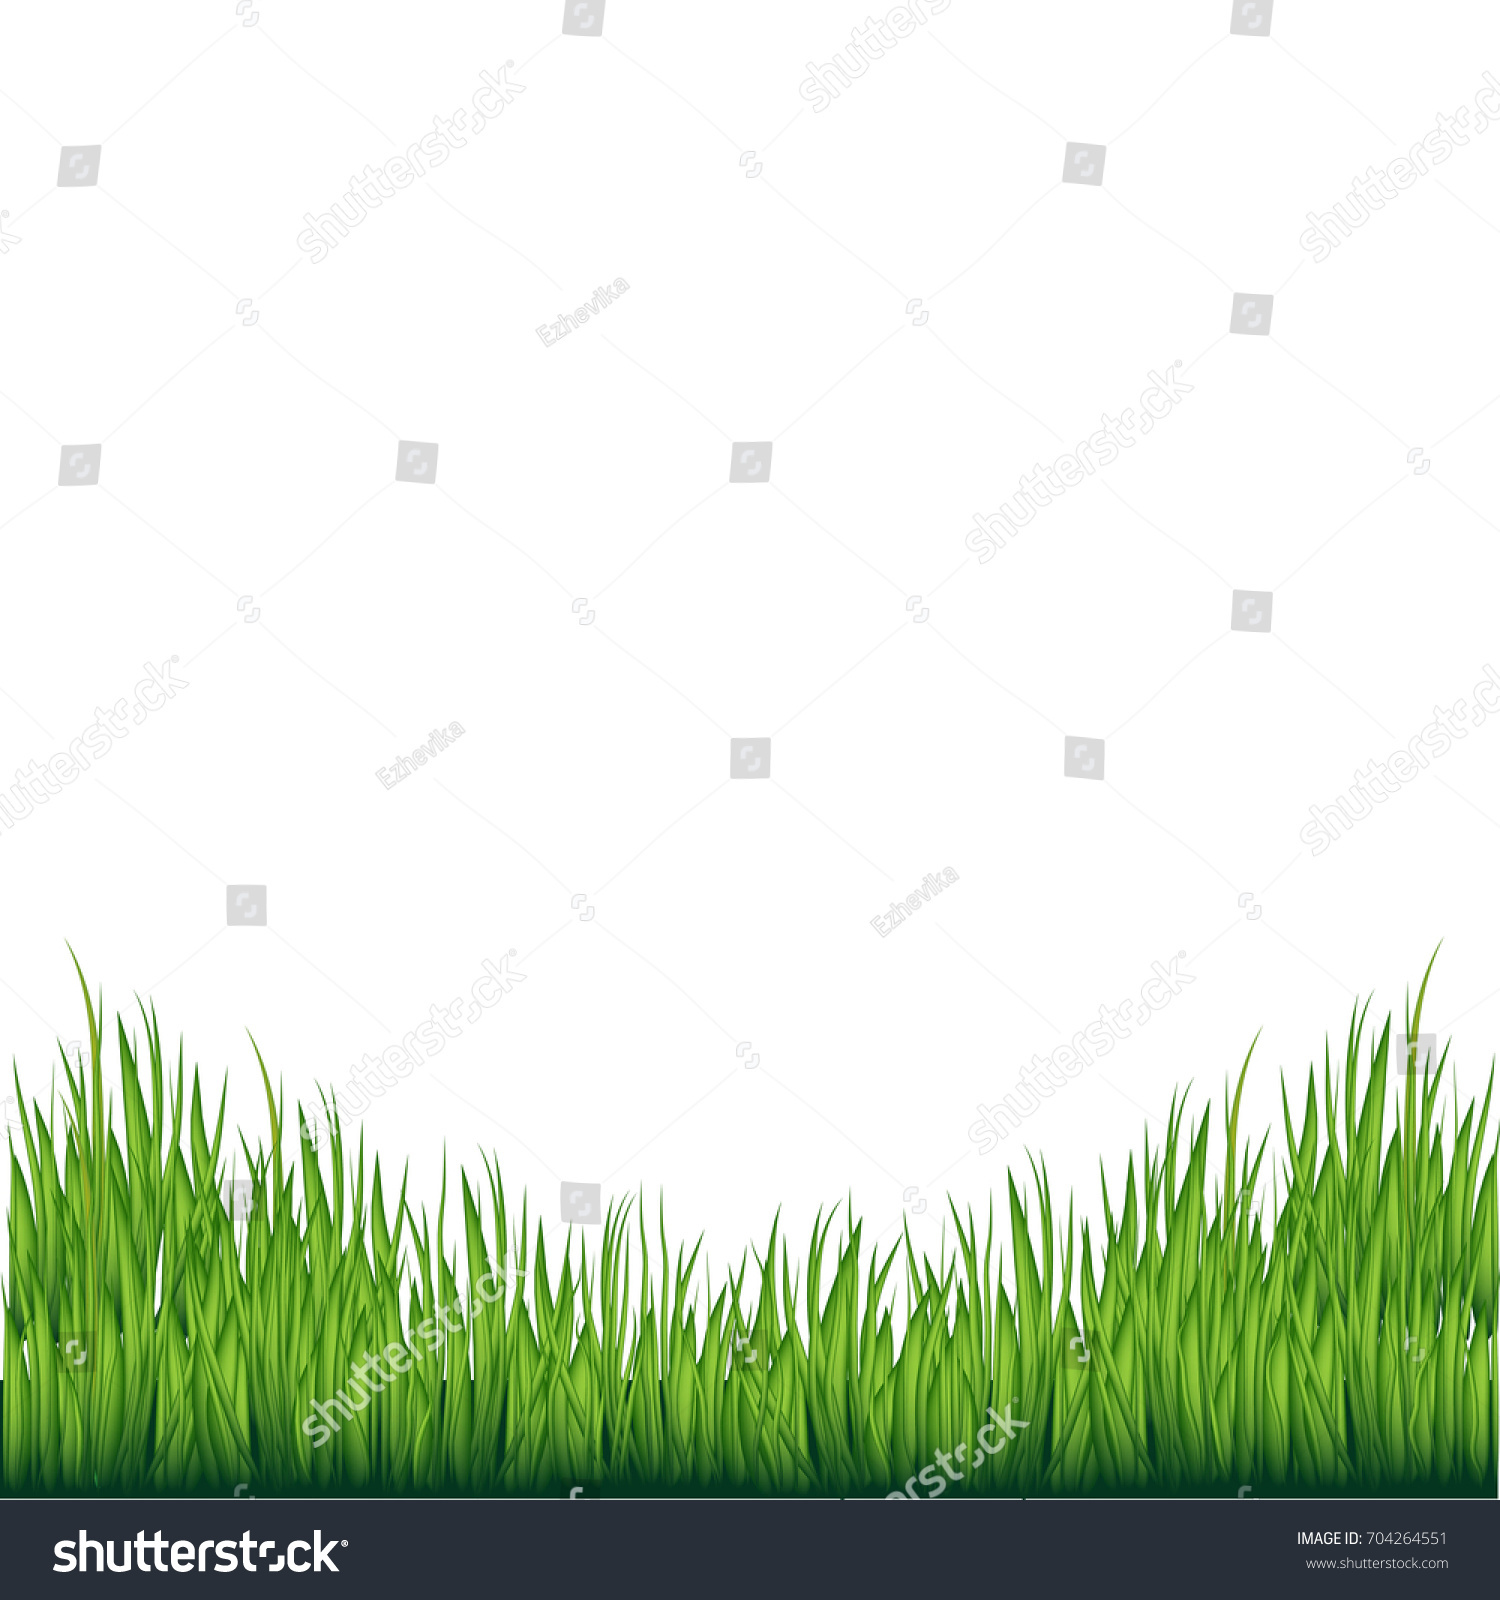 Green Grass Borders Isolated Grass On Stock Illustration 704264551 ...